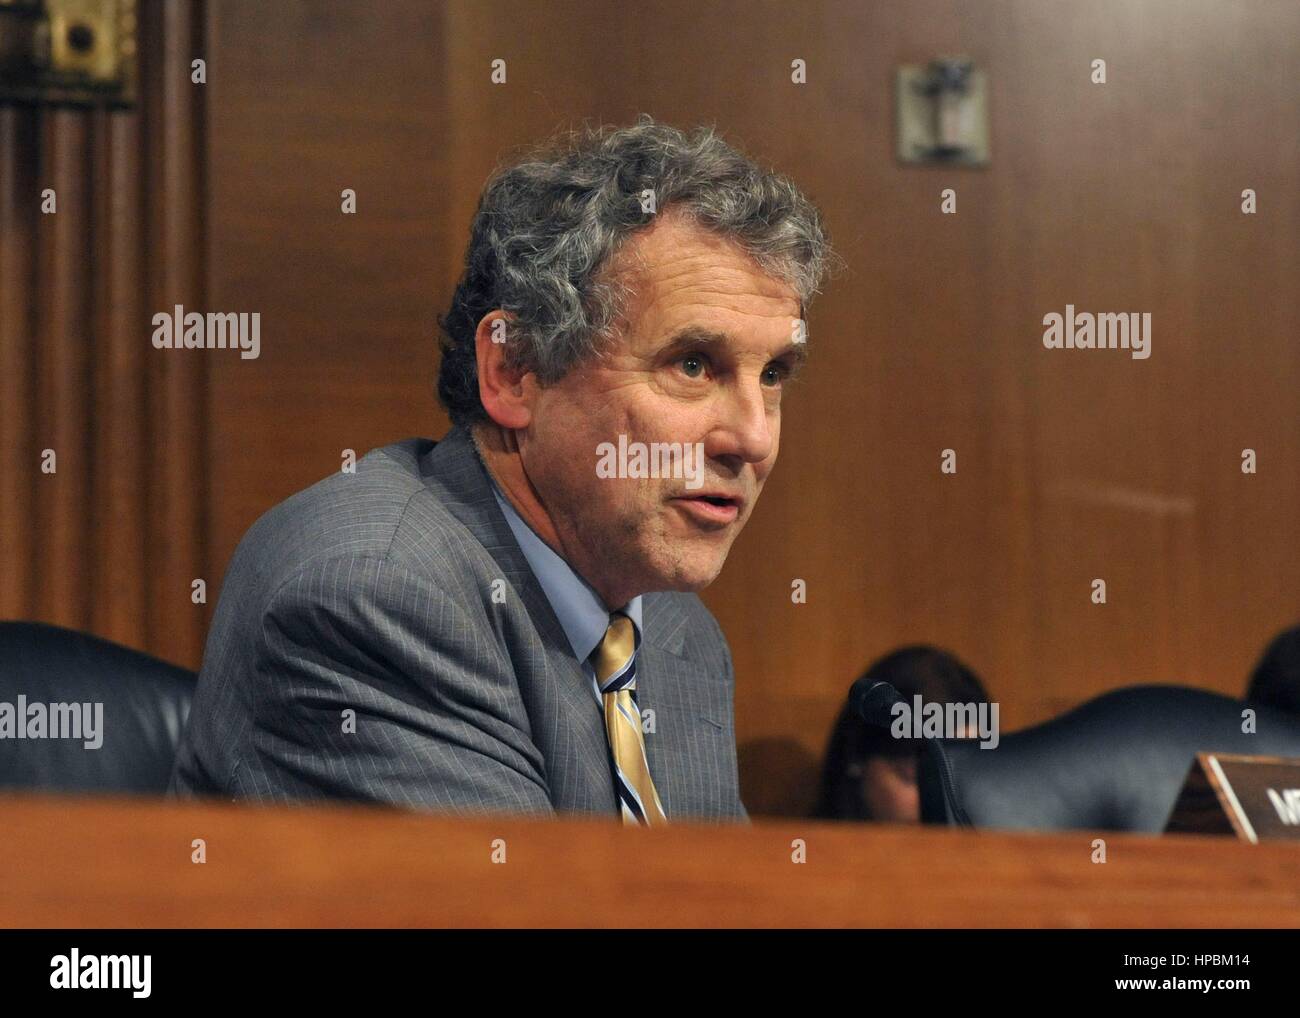 U.S. Senator Sherrod Brown, of Ohio asks a question of Dr. David Shulkin during confirmation hearings in the Senate Veterans Affairs Committee February 1, 2017 in Washington, DC. Shulkin was confirmed as the new head of the Veterans Affairs administration by a unanimous vote. Stock Photo